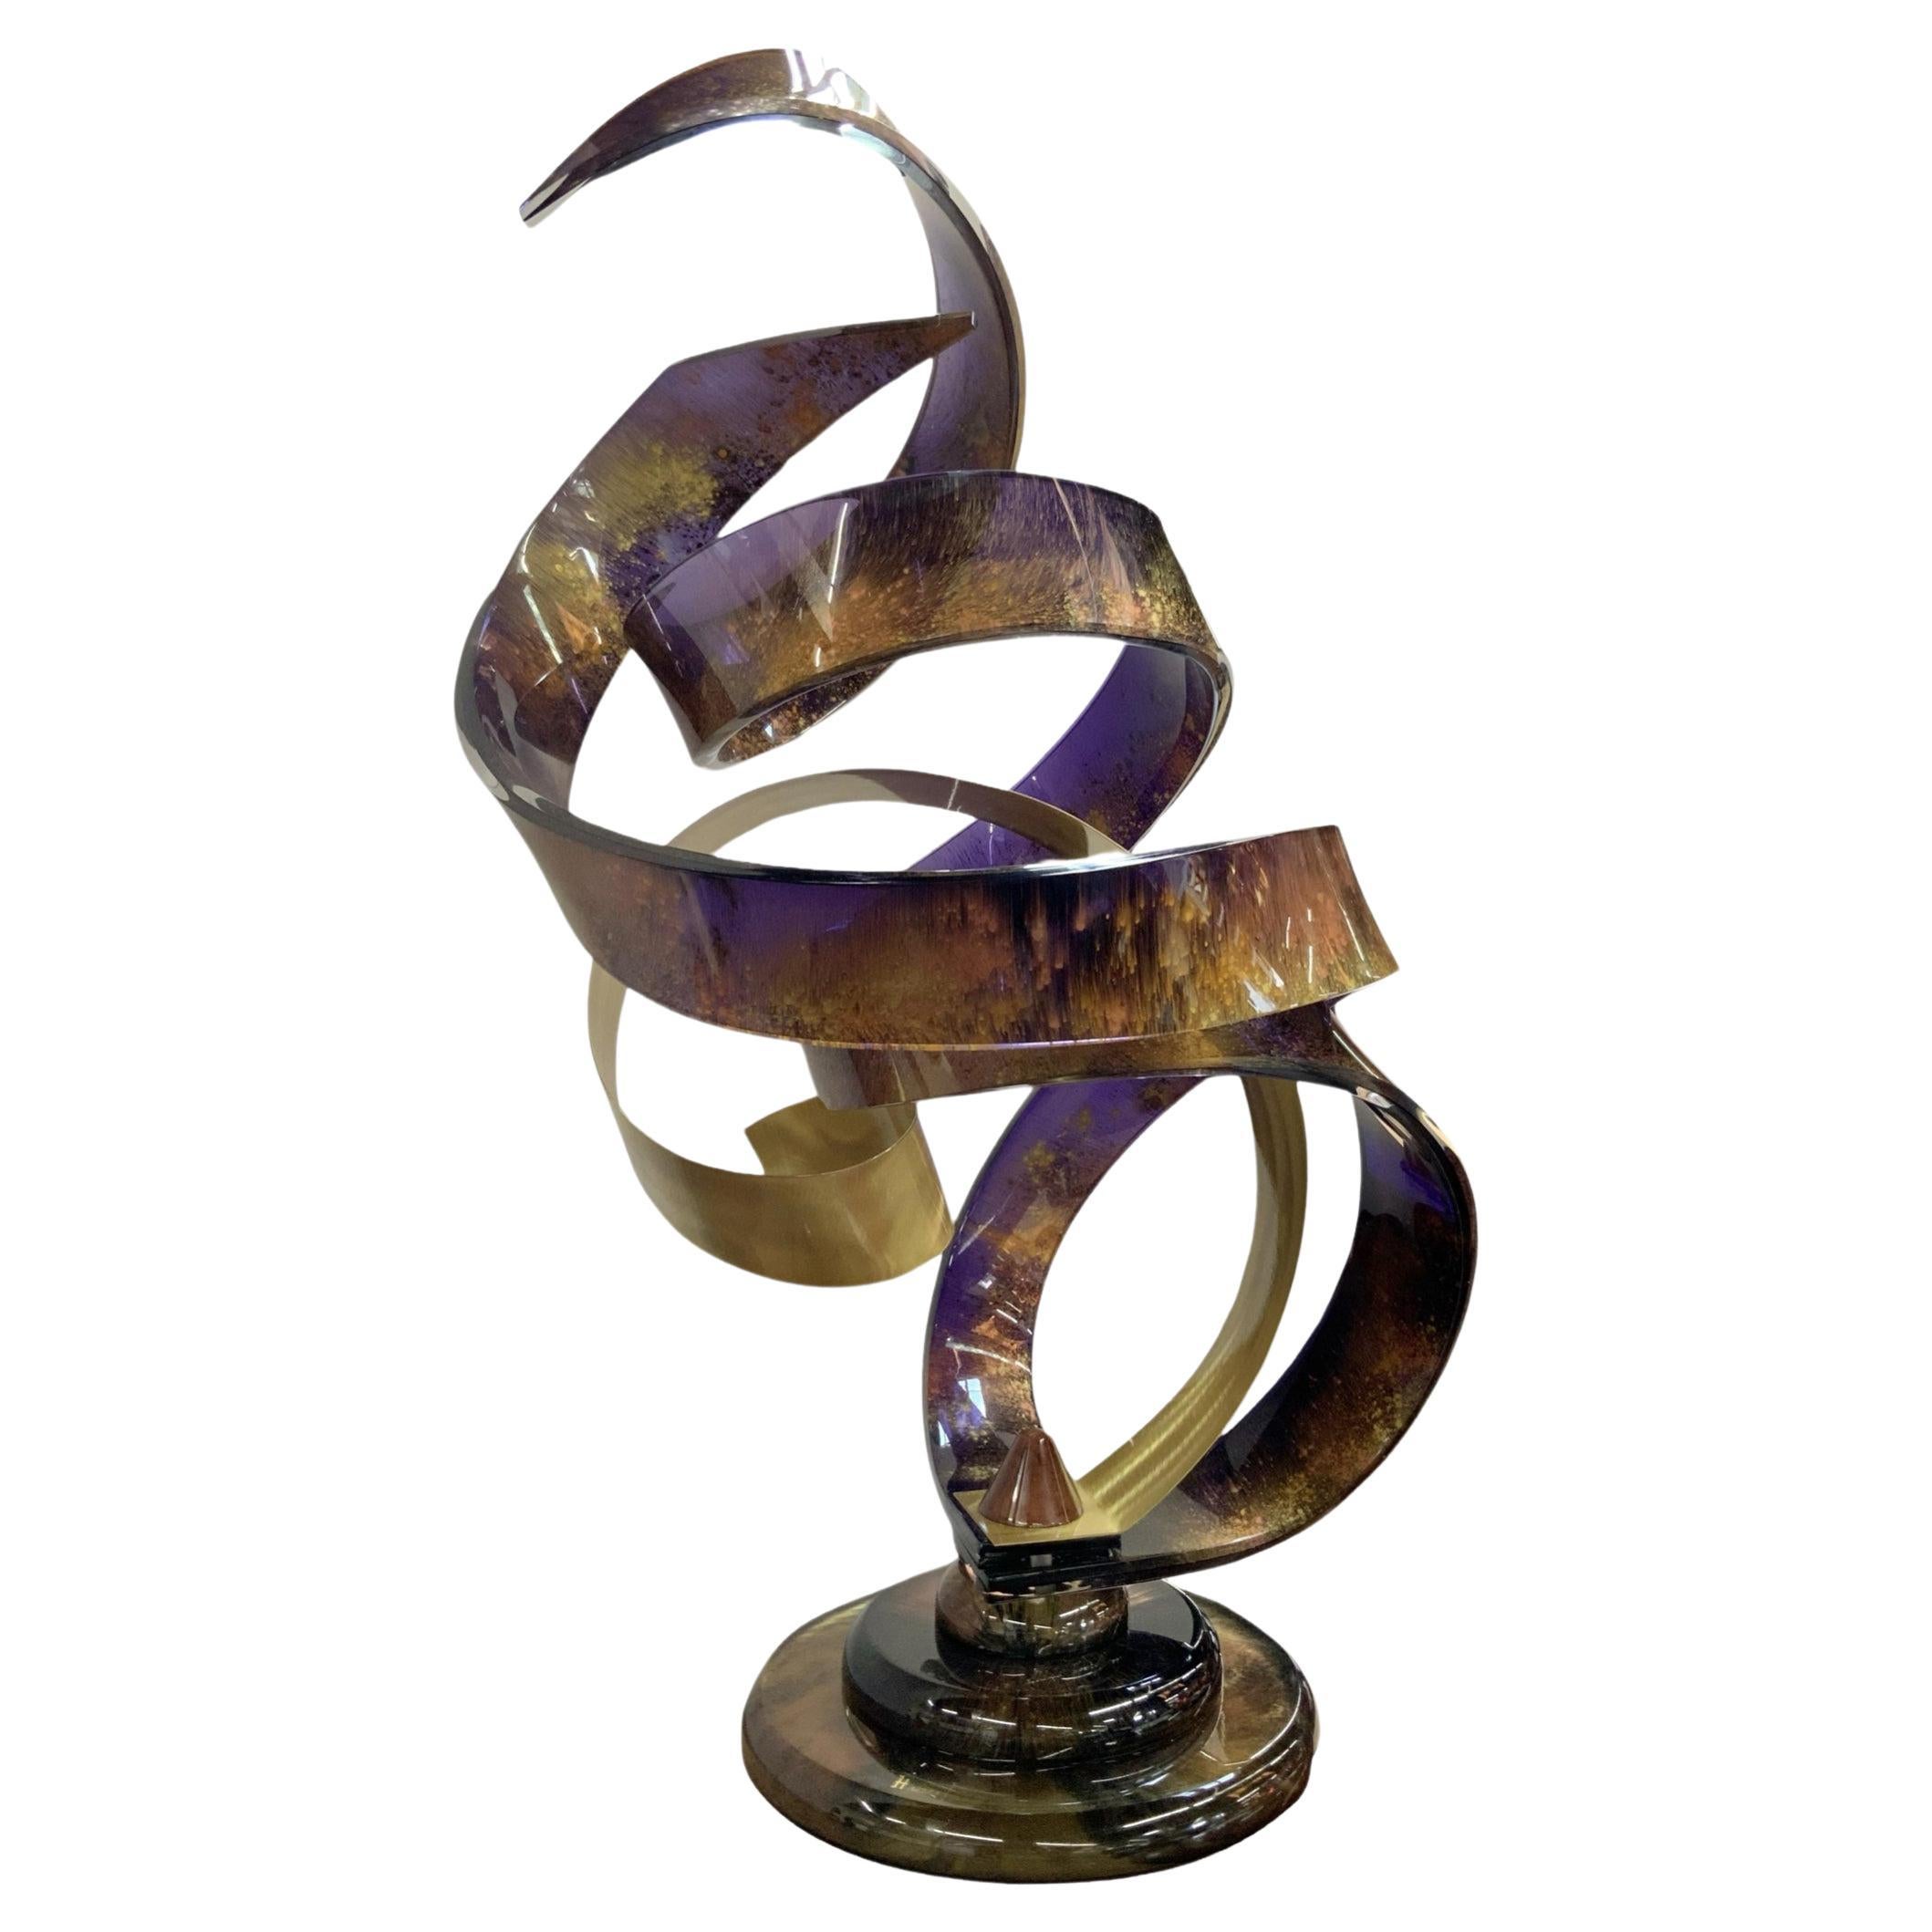 Abstract Lucite and Brass Spiral Sculpture by Shlomi Haziza. For Sale